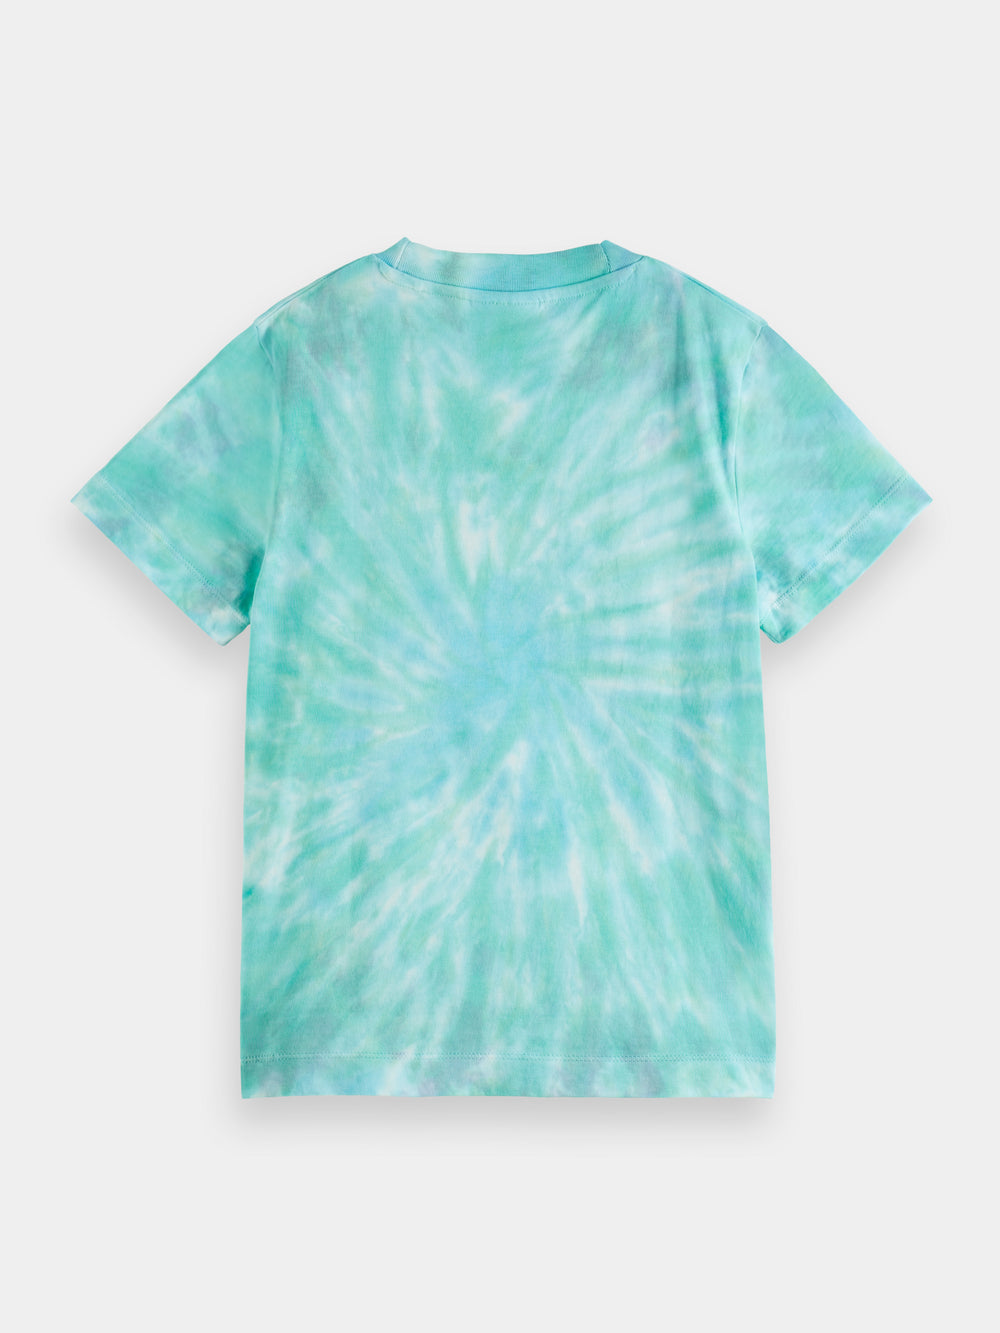 Relaxed fit graphic tie-dye t-shirt - Scotch & Soda AU